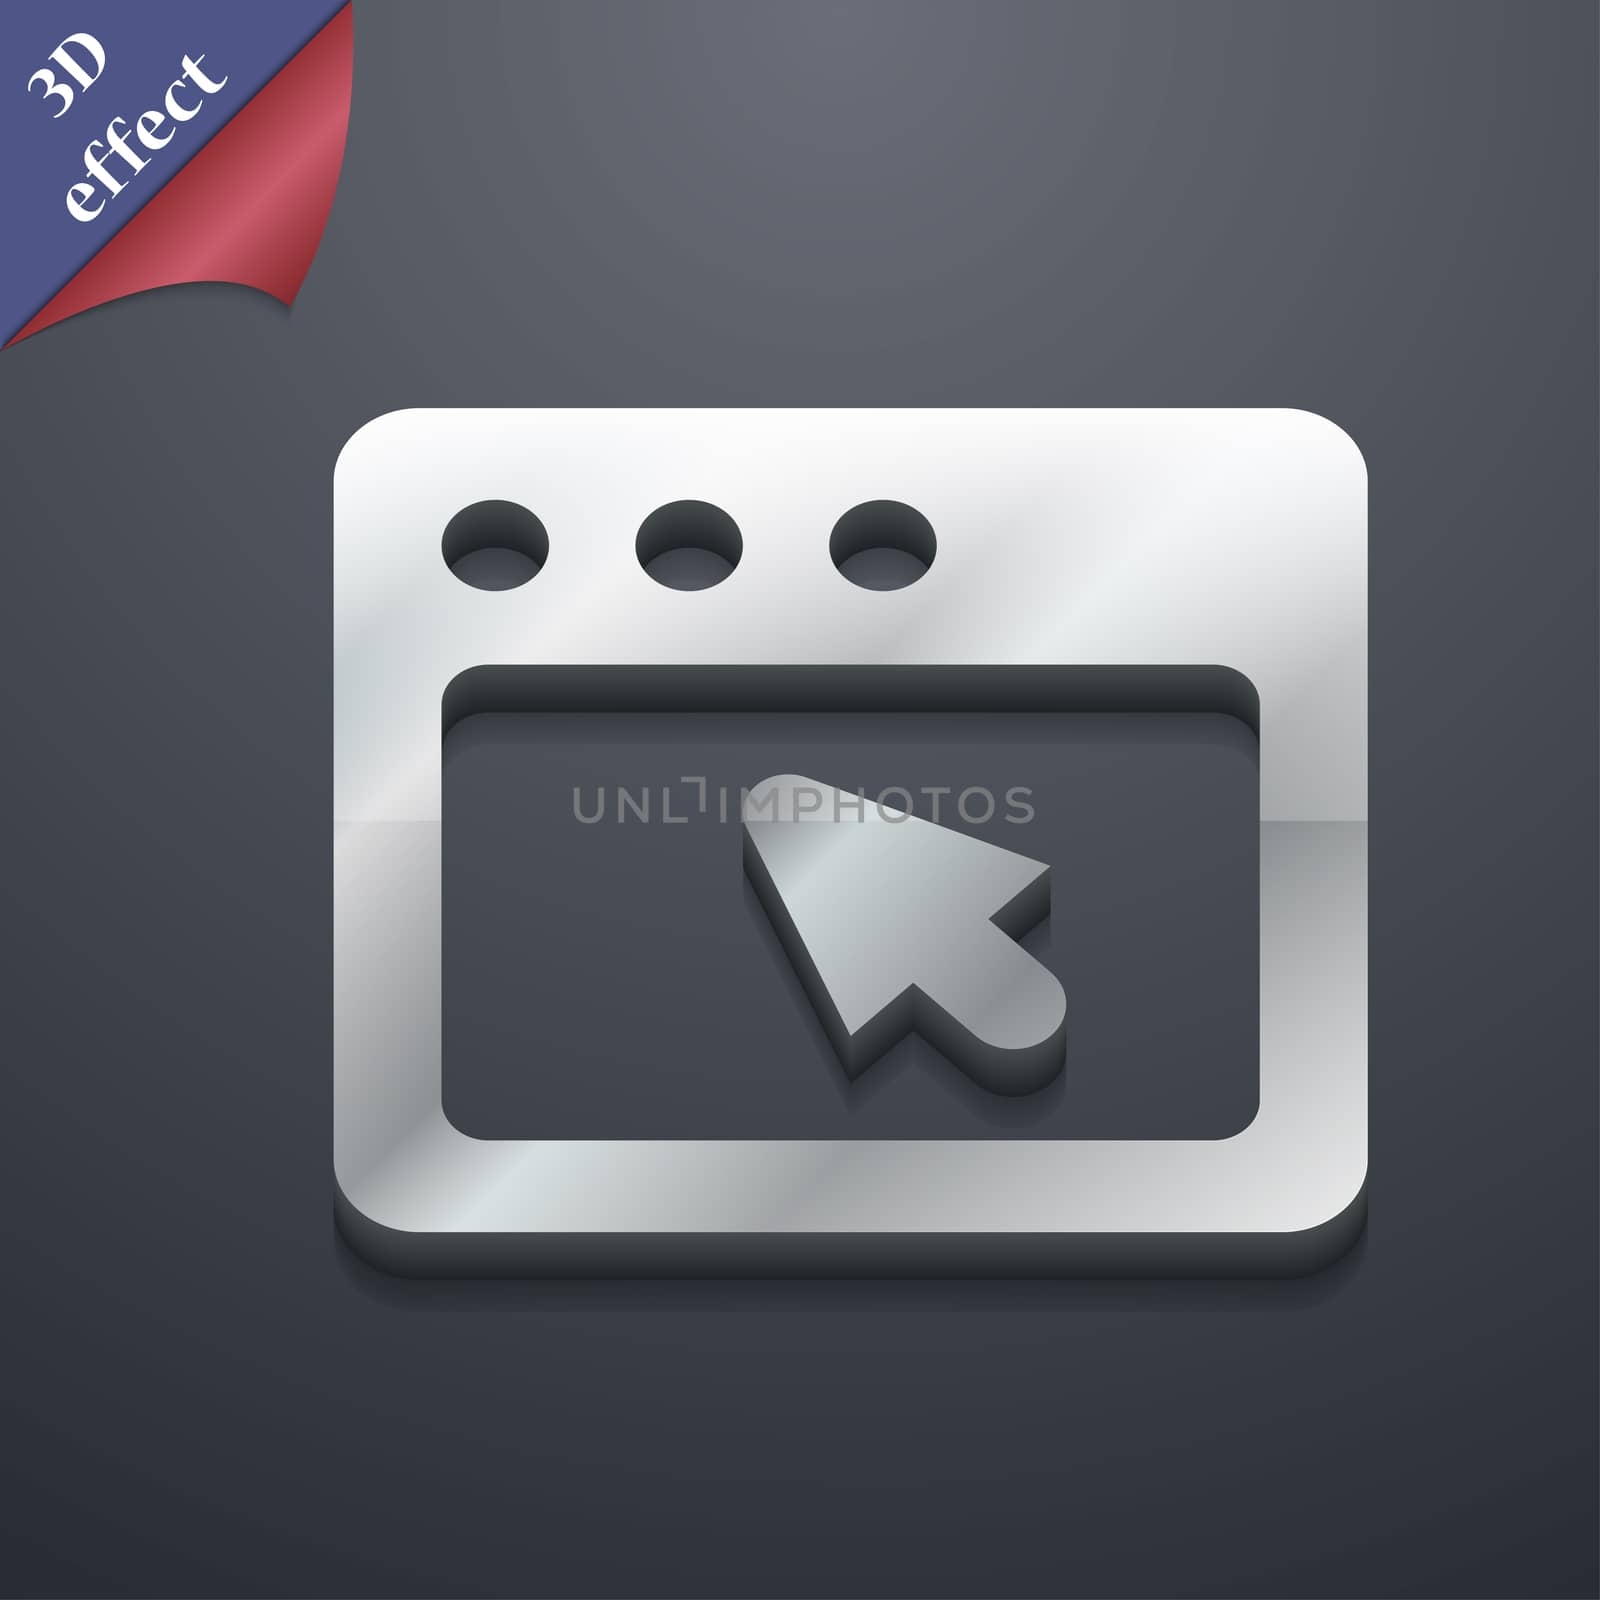 the dialog box icon symbol. 3D style. Trendy, modern design with space for your text illustration. Rastrized copy